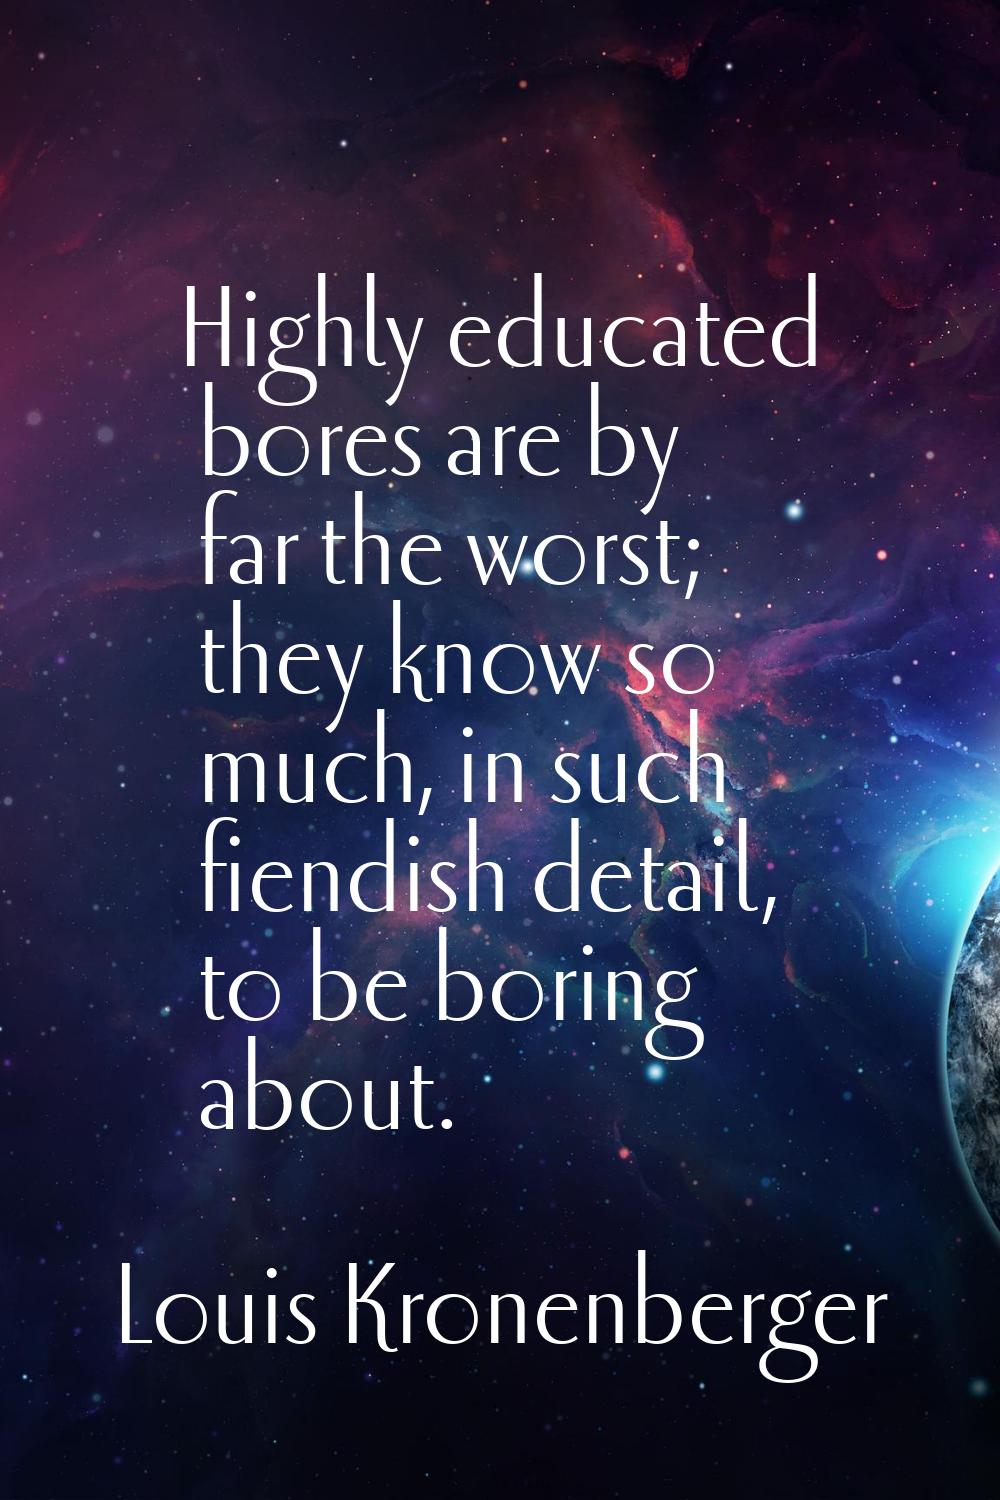 Highly educated bores are by far the worst; they know so much, in such fiendish detail, to be borin